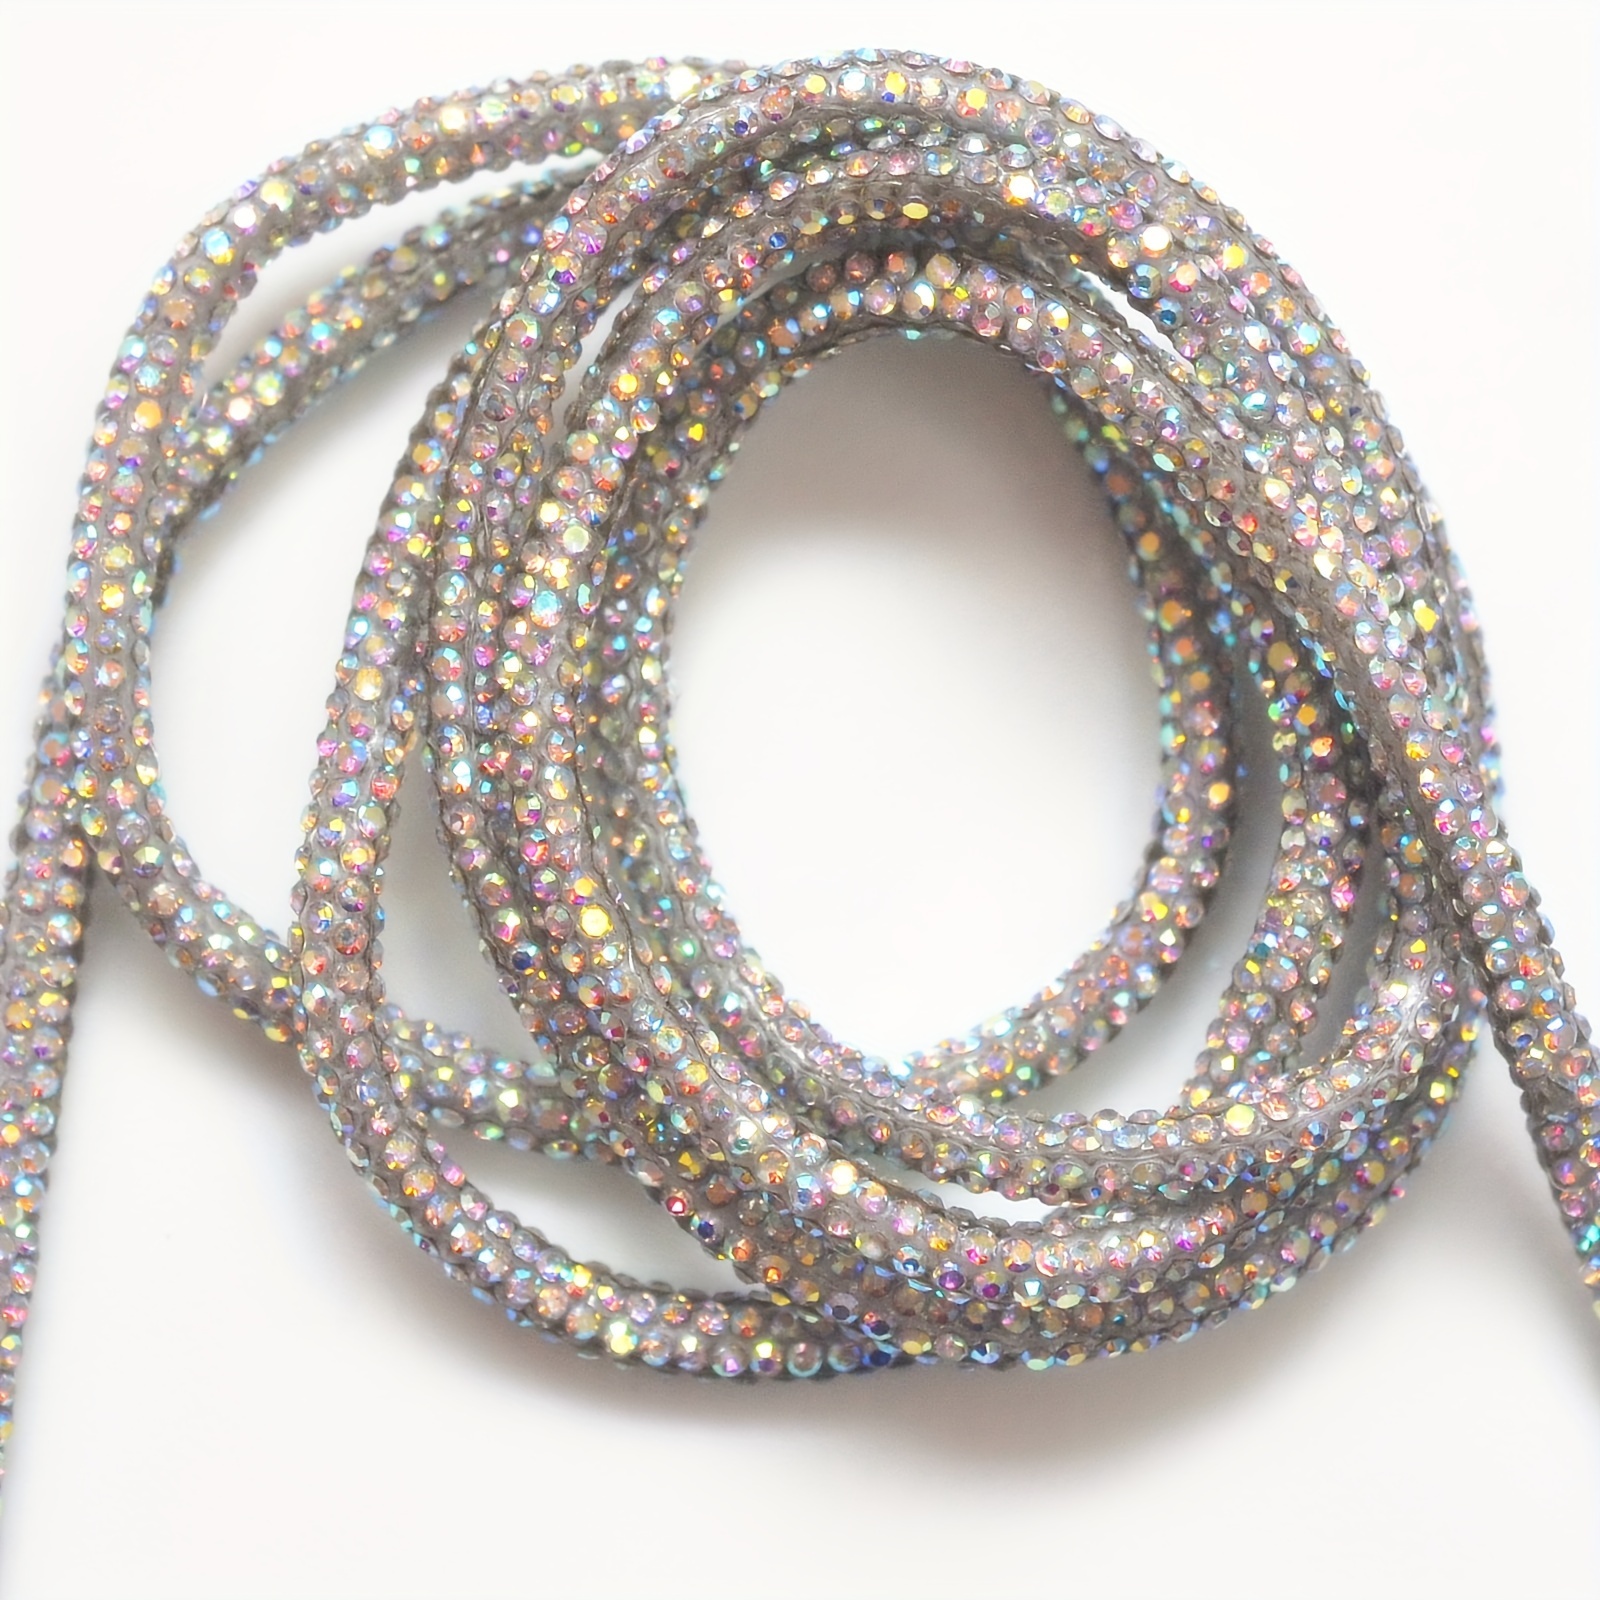 1pc, Crystal Cord (36 inch), 6mm Trimming Glitter Rhinestone Soft Tube, Shoelace Glitter Round Rope